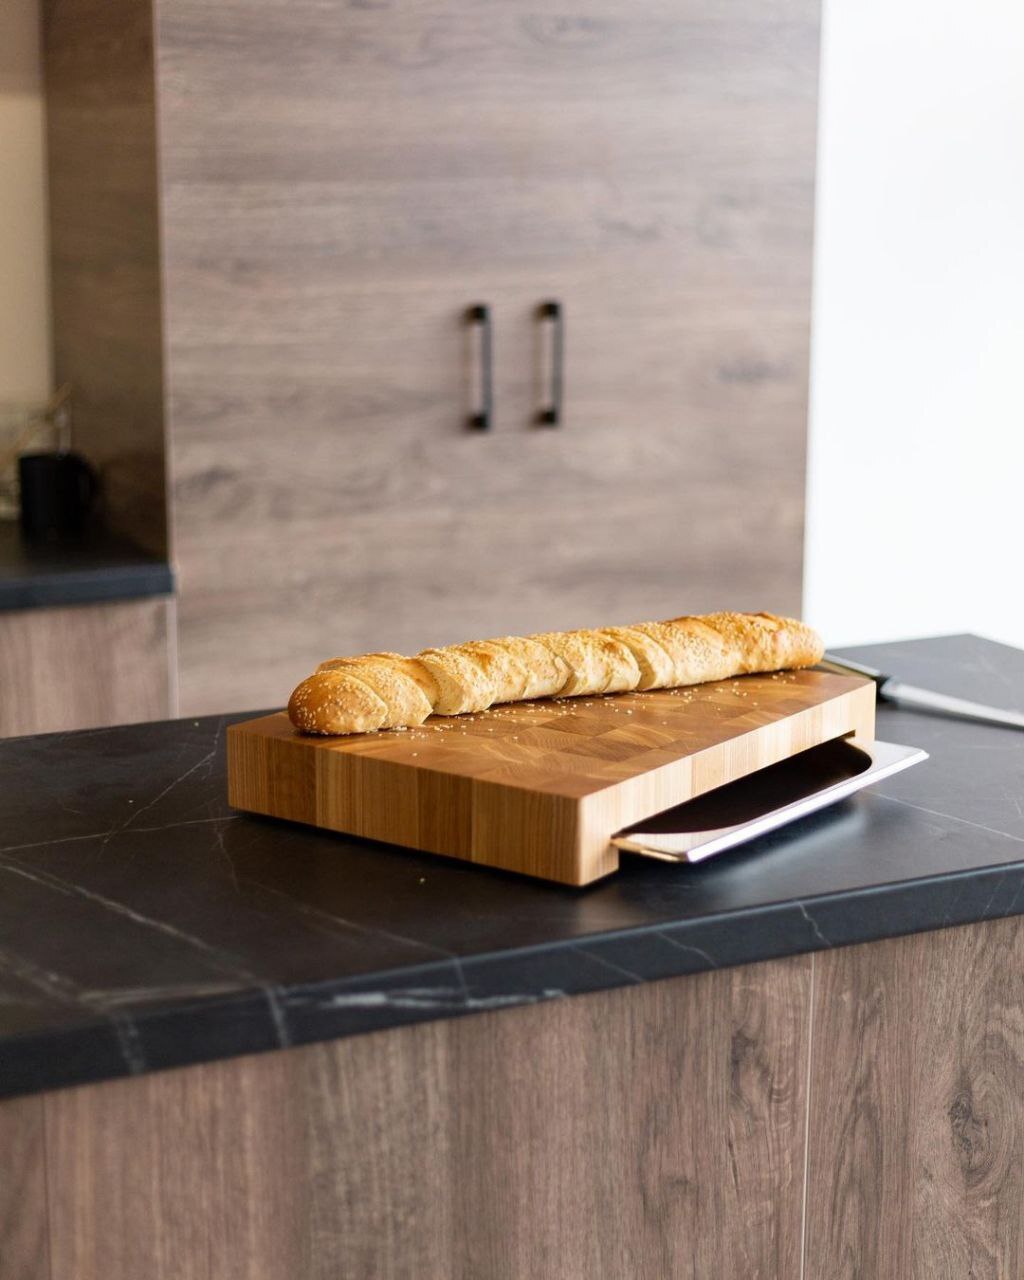 Professional wooden kitchen board made of oiled oak with stainless steel container.